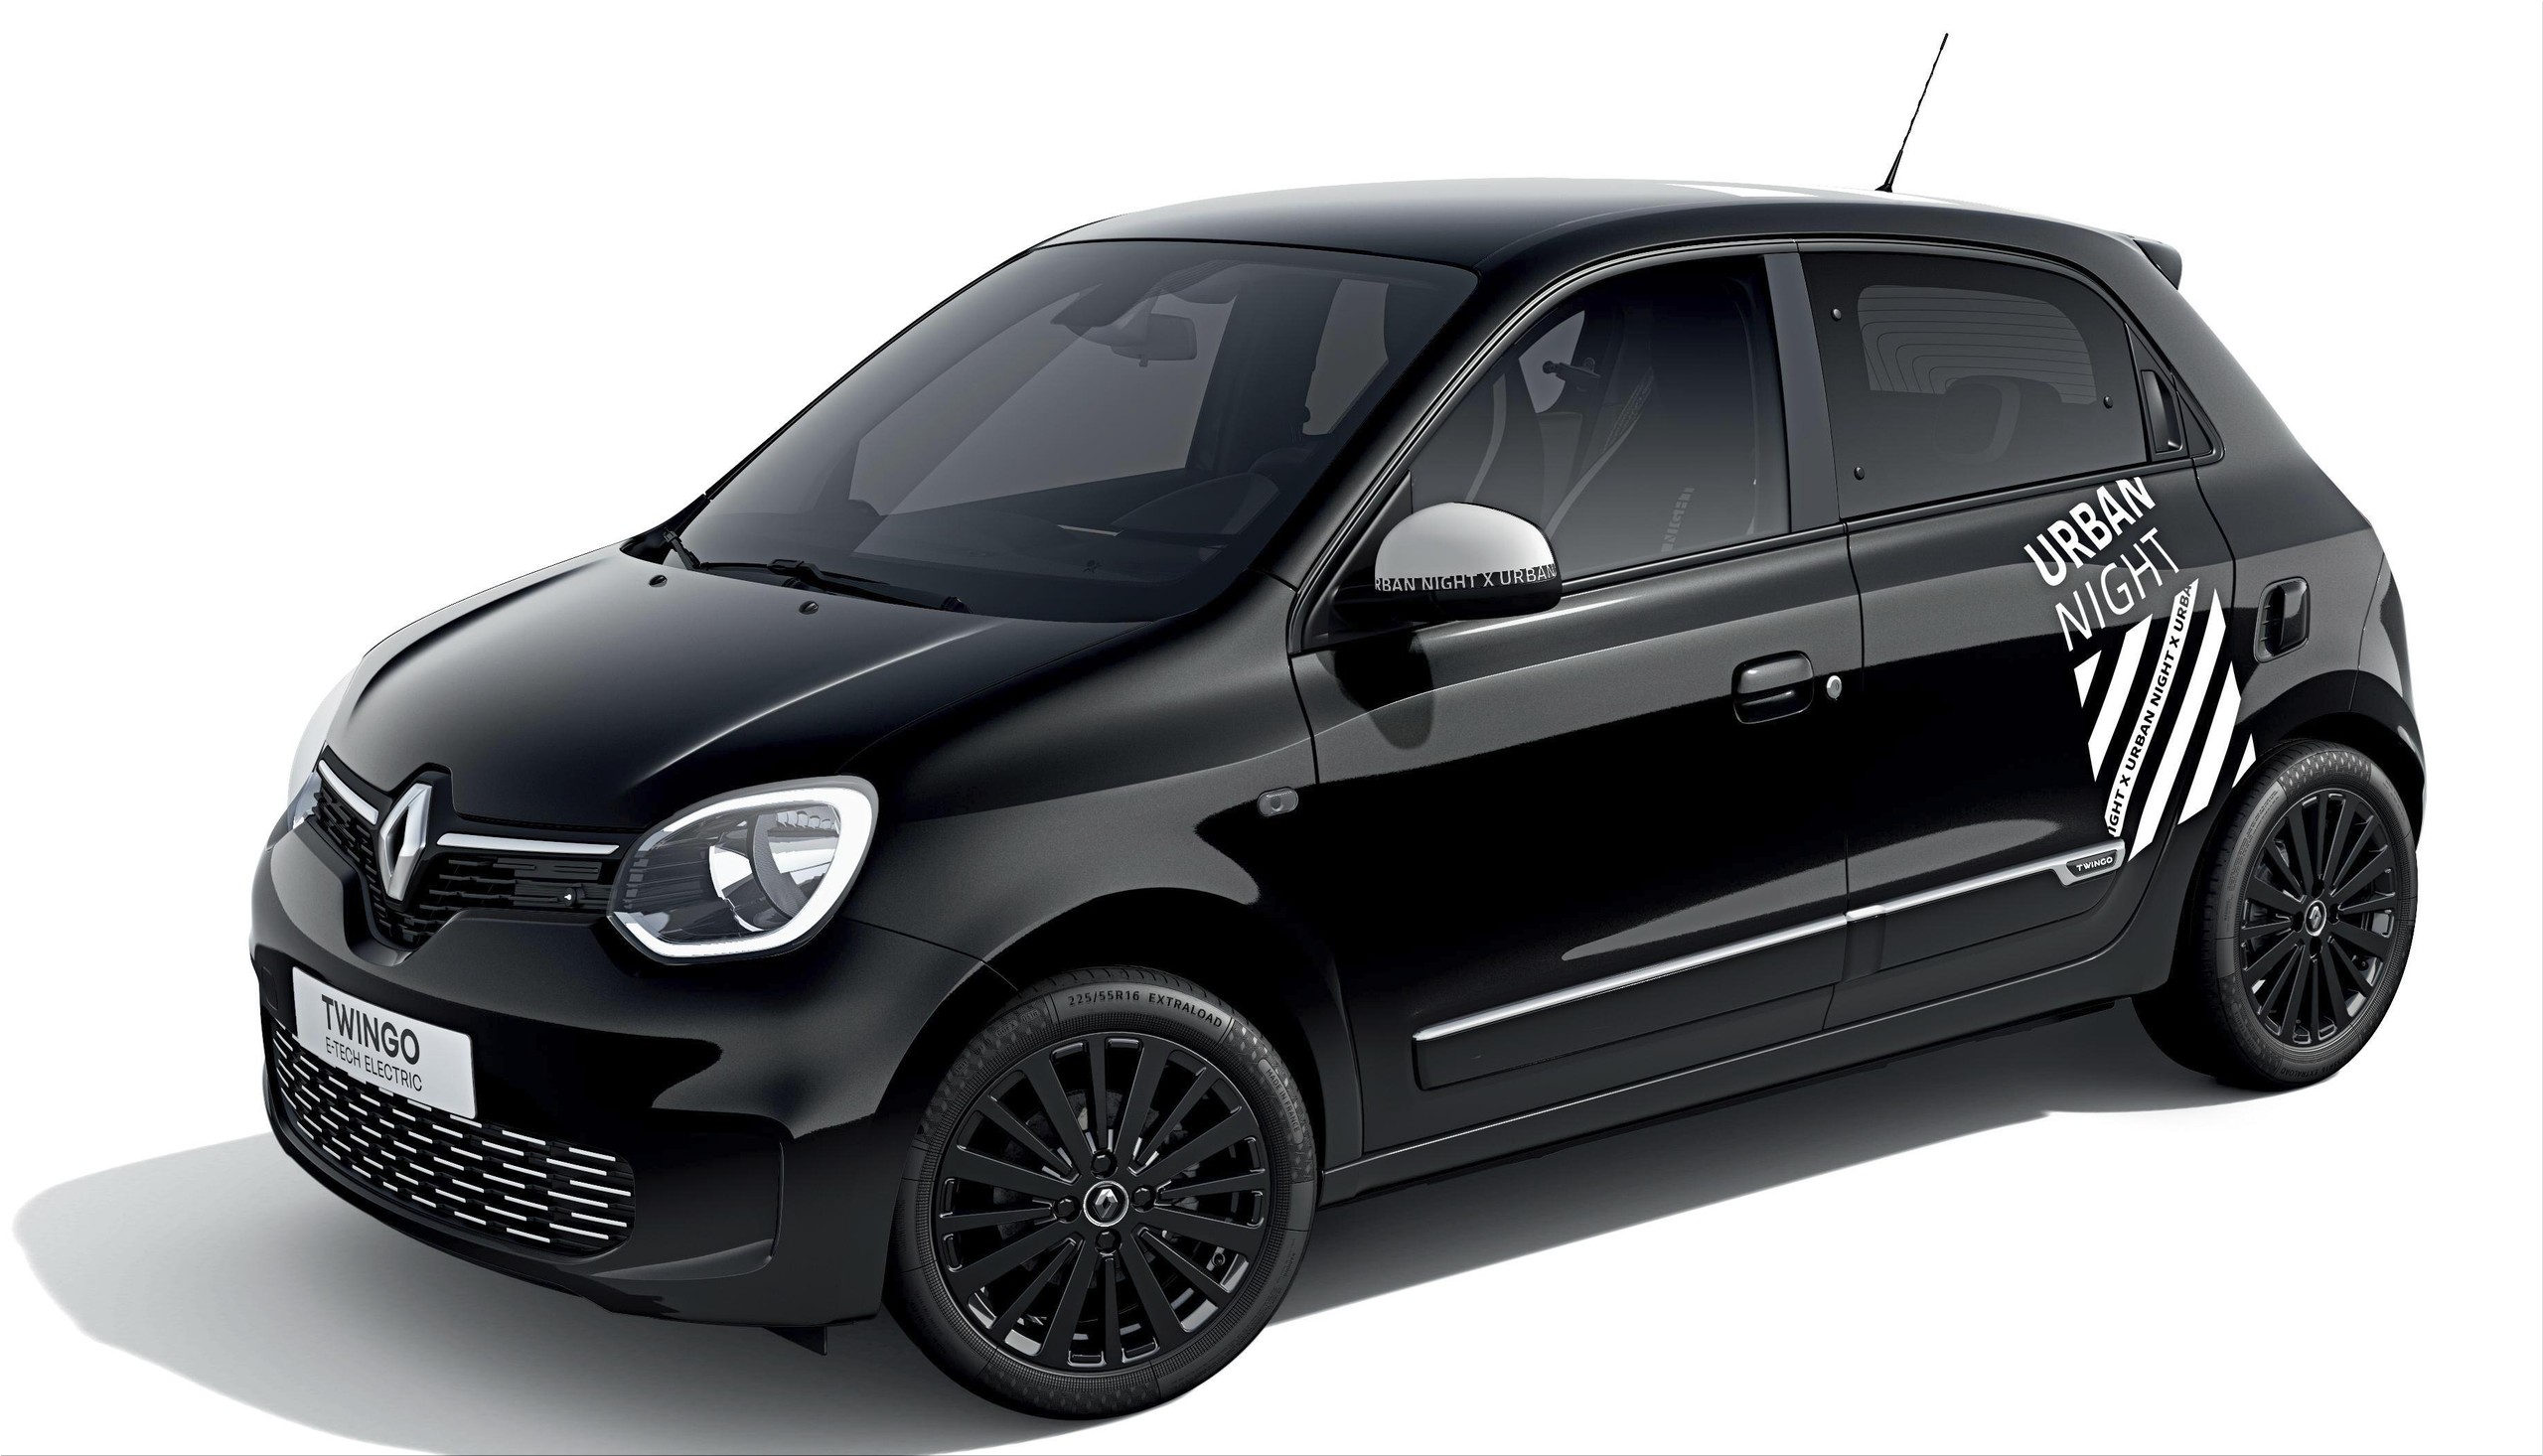 The new Renault Twingo Urban Night electric city car from 26,650